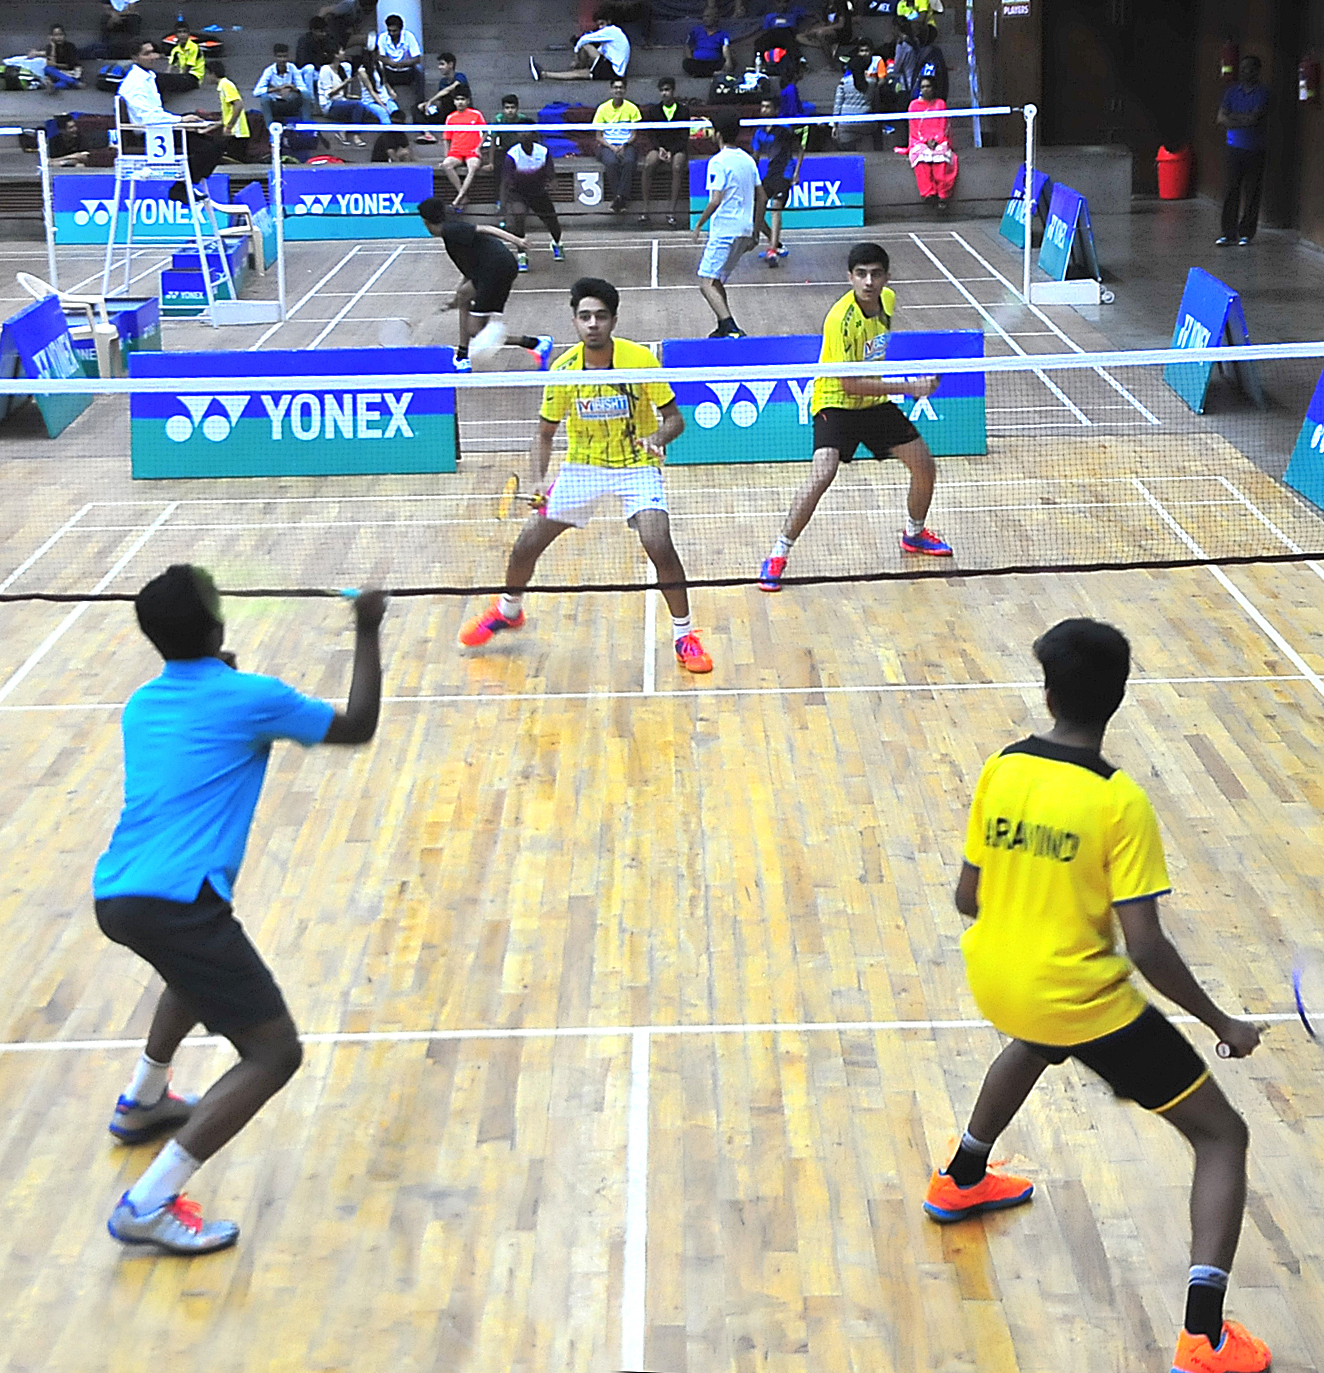 Badminton assn to vie for hosting national championship